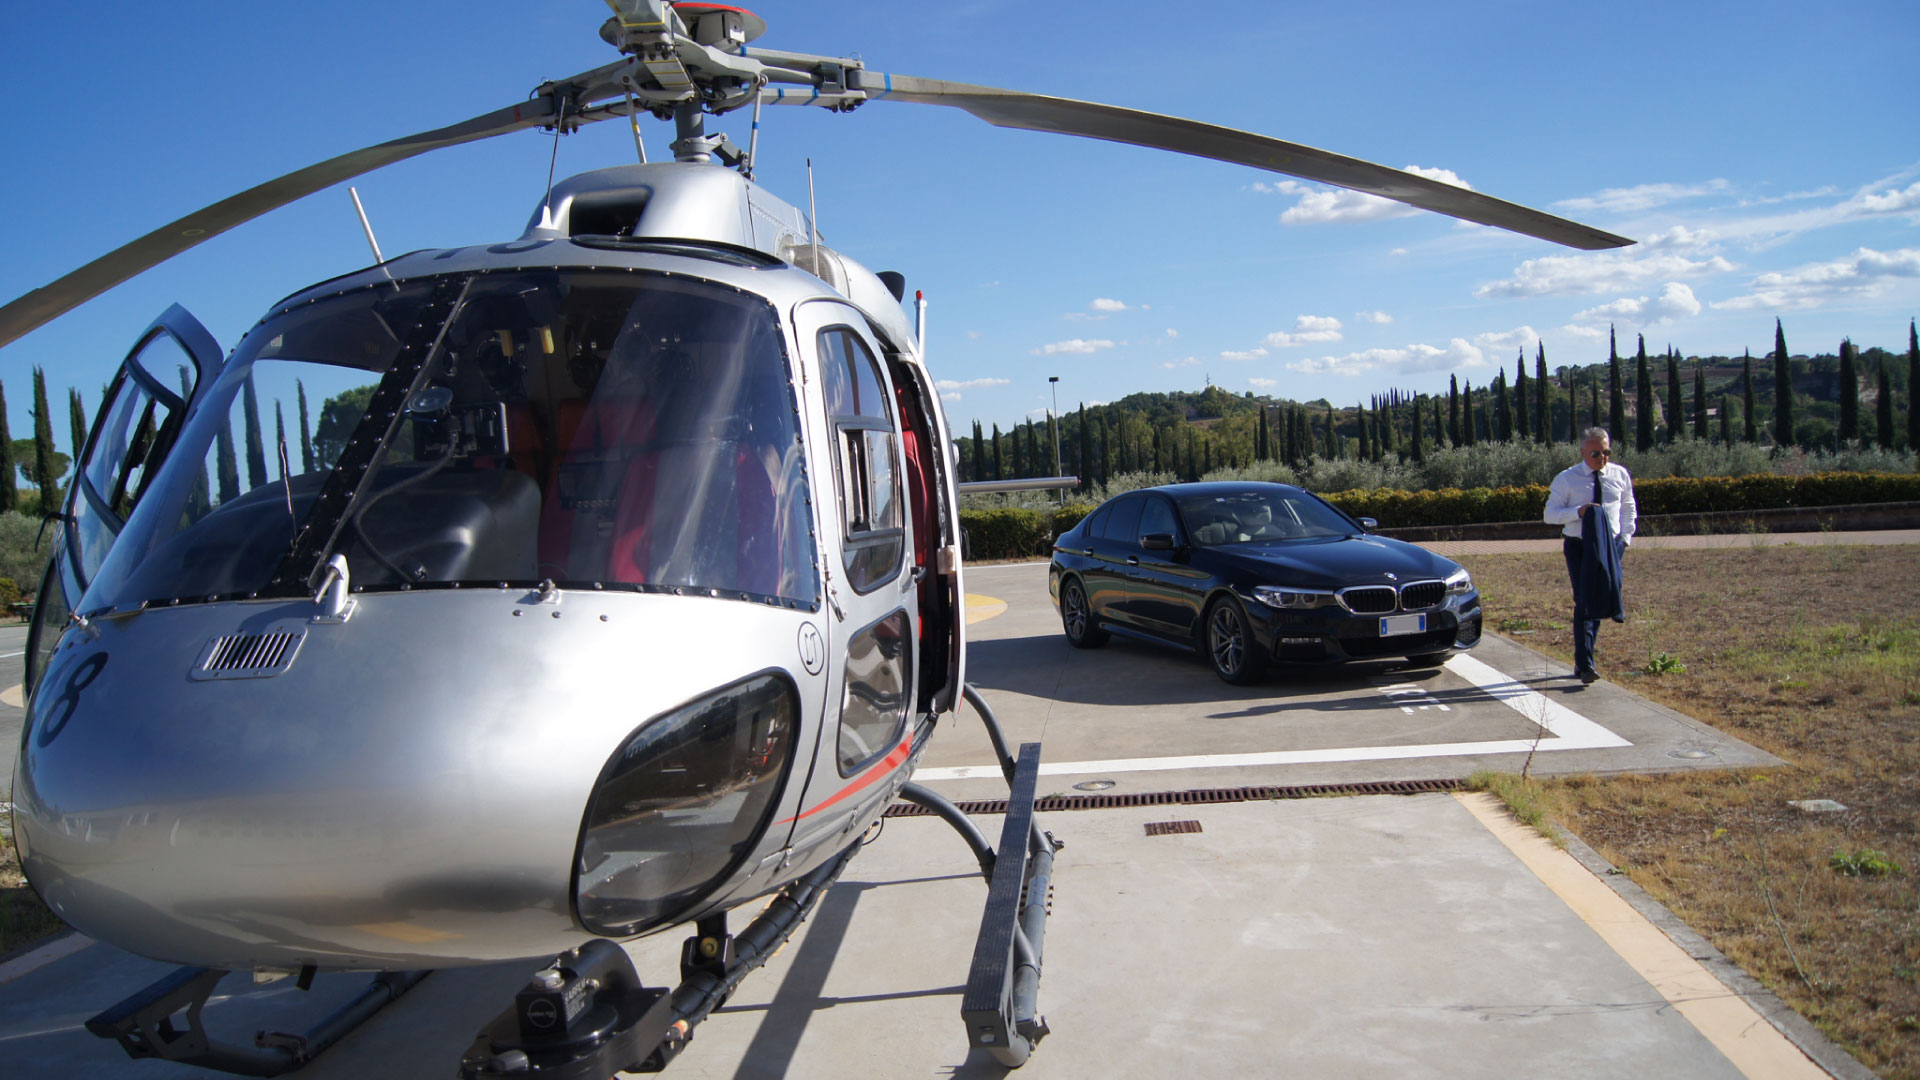 Massimiliano Dionisi, owner of The Roman Limousine Service, next to his luxury car and a helicopter